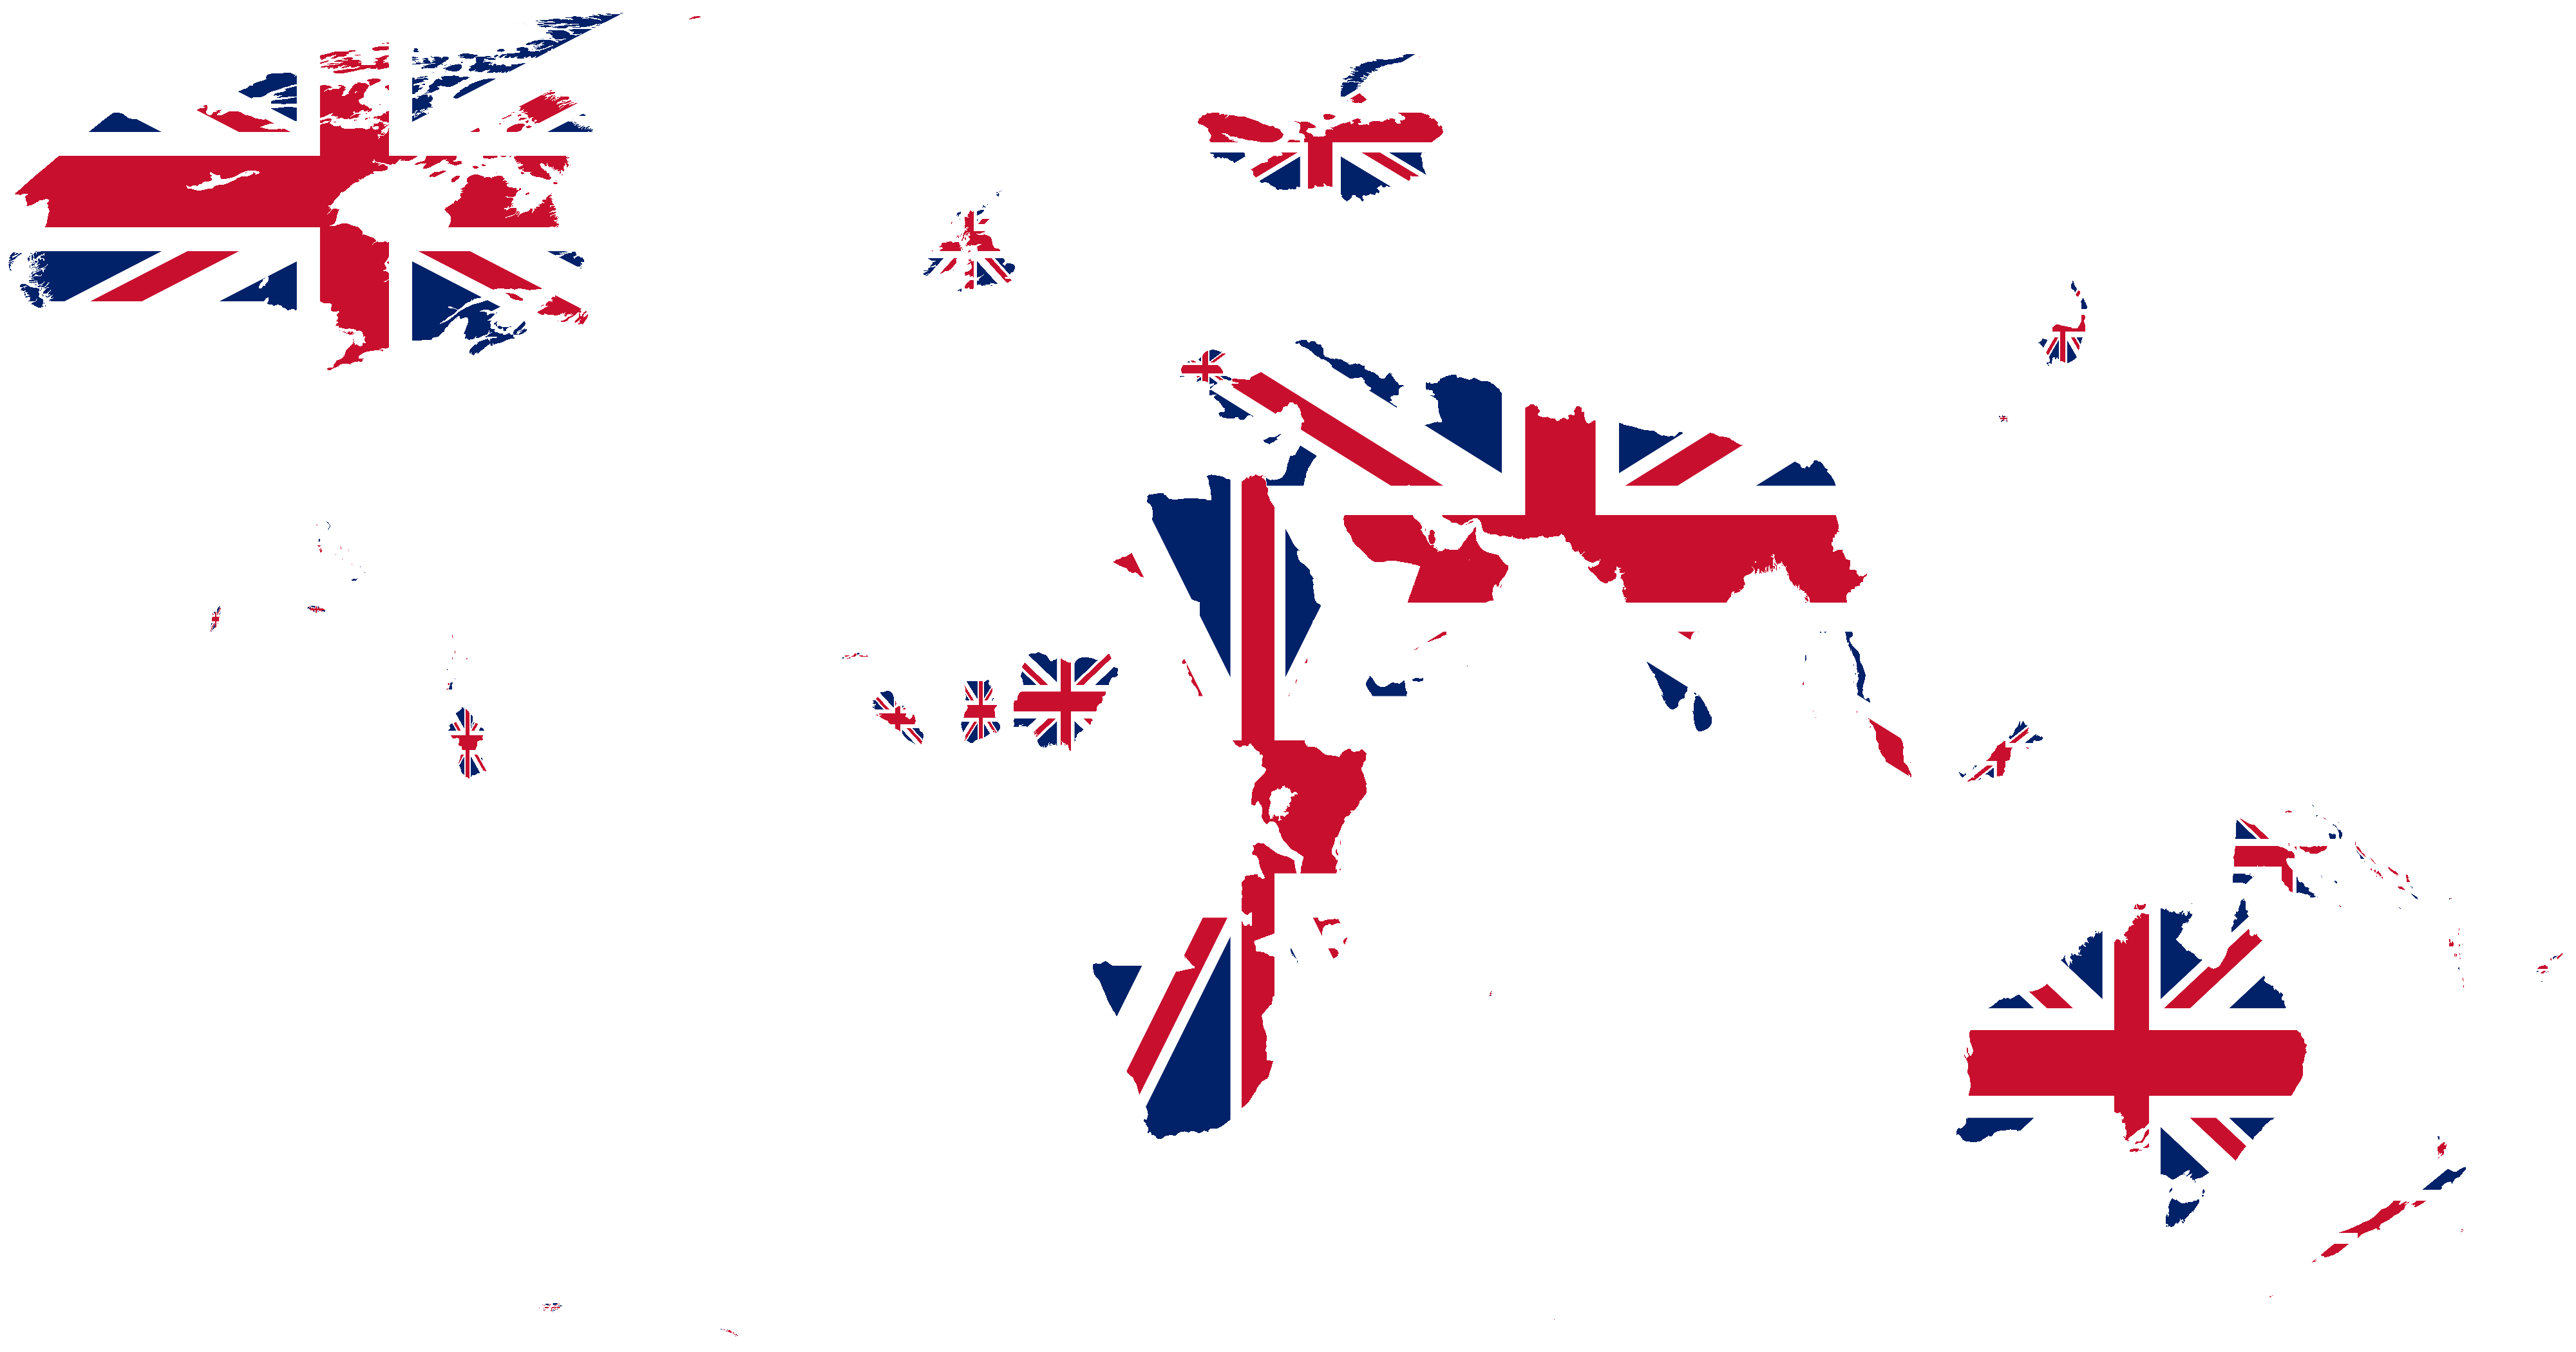 Flag-map of British Empire by nguyenpeachiew on DeviantArt